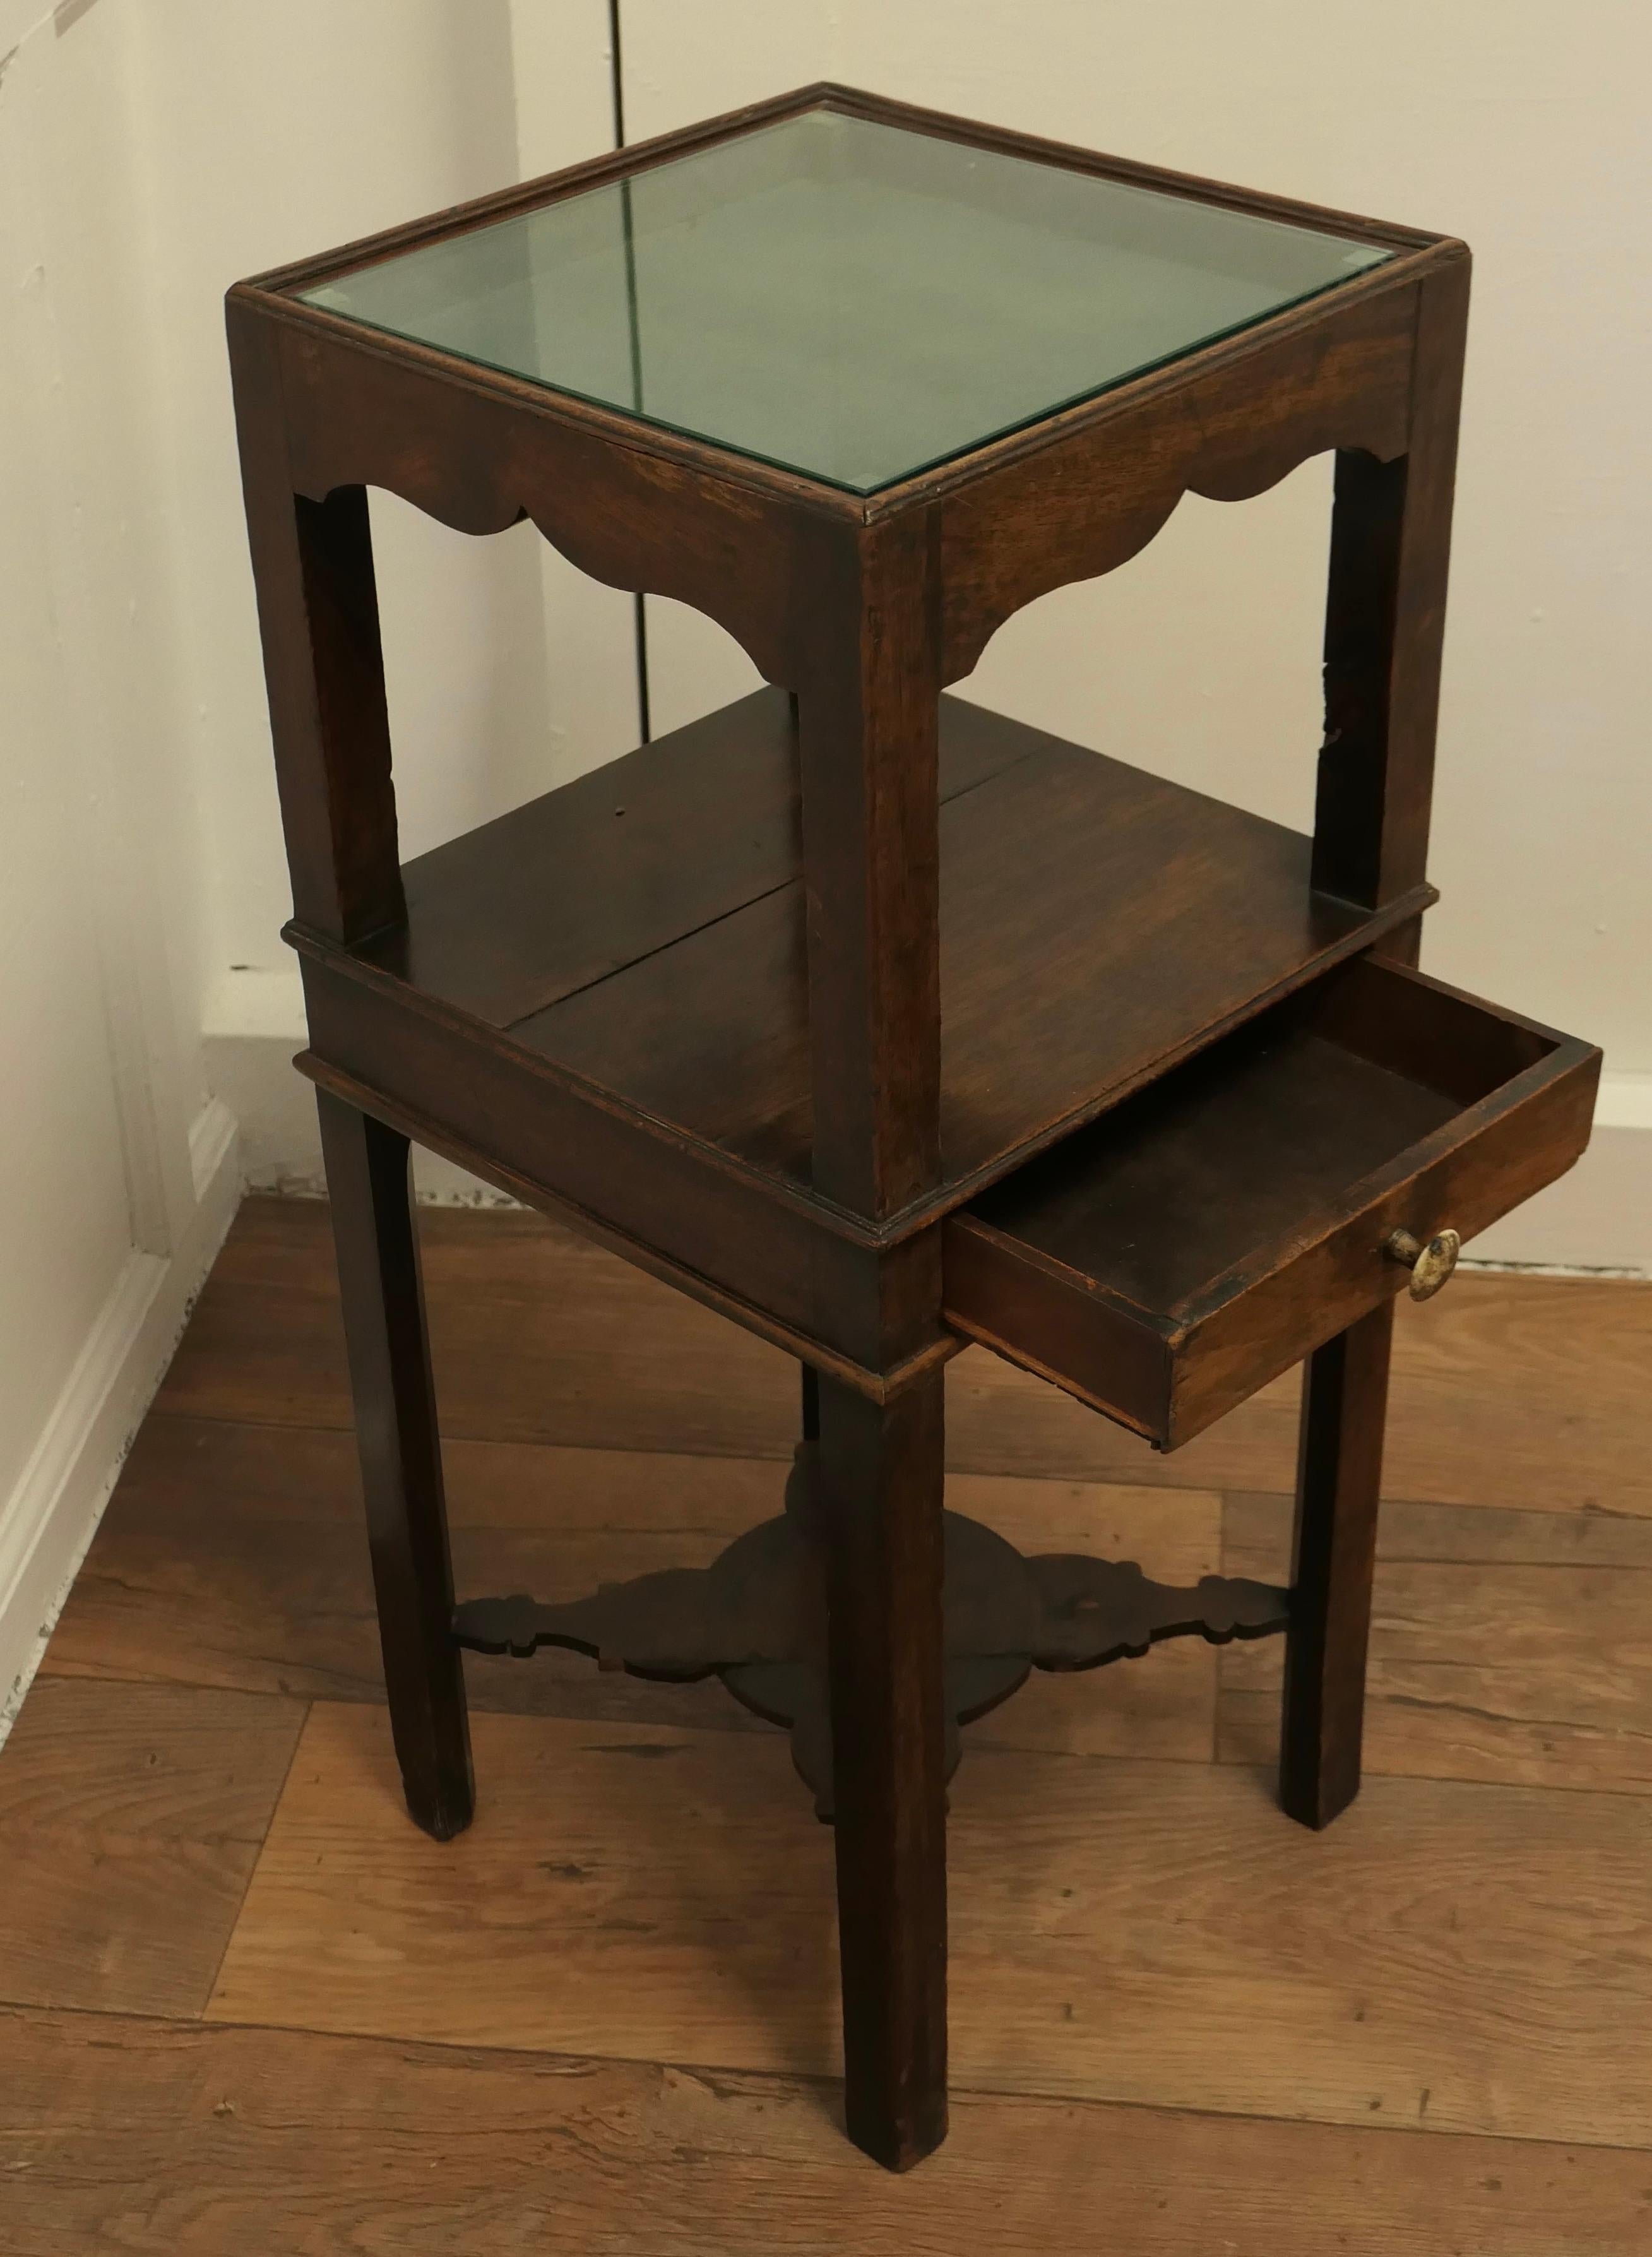 Walnut Georgian Etagere or Night Table This is a Very Useful Table